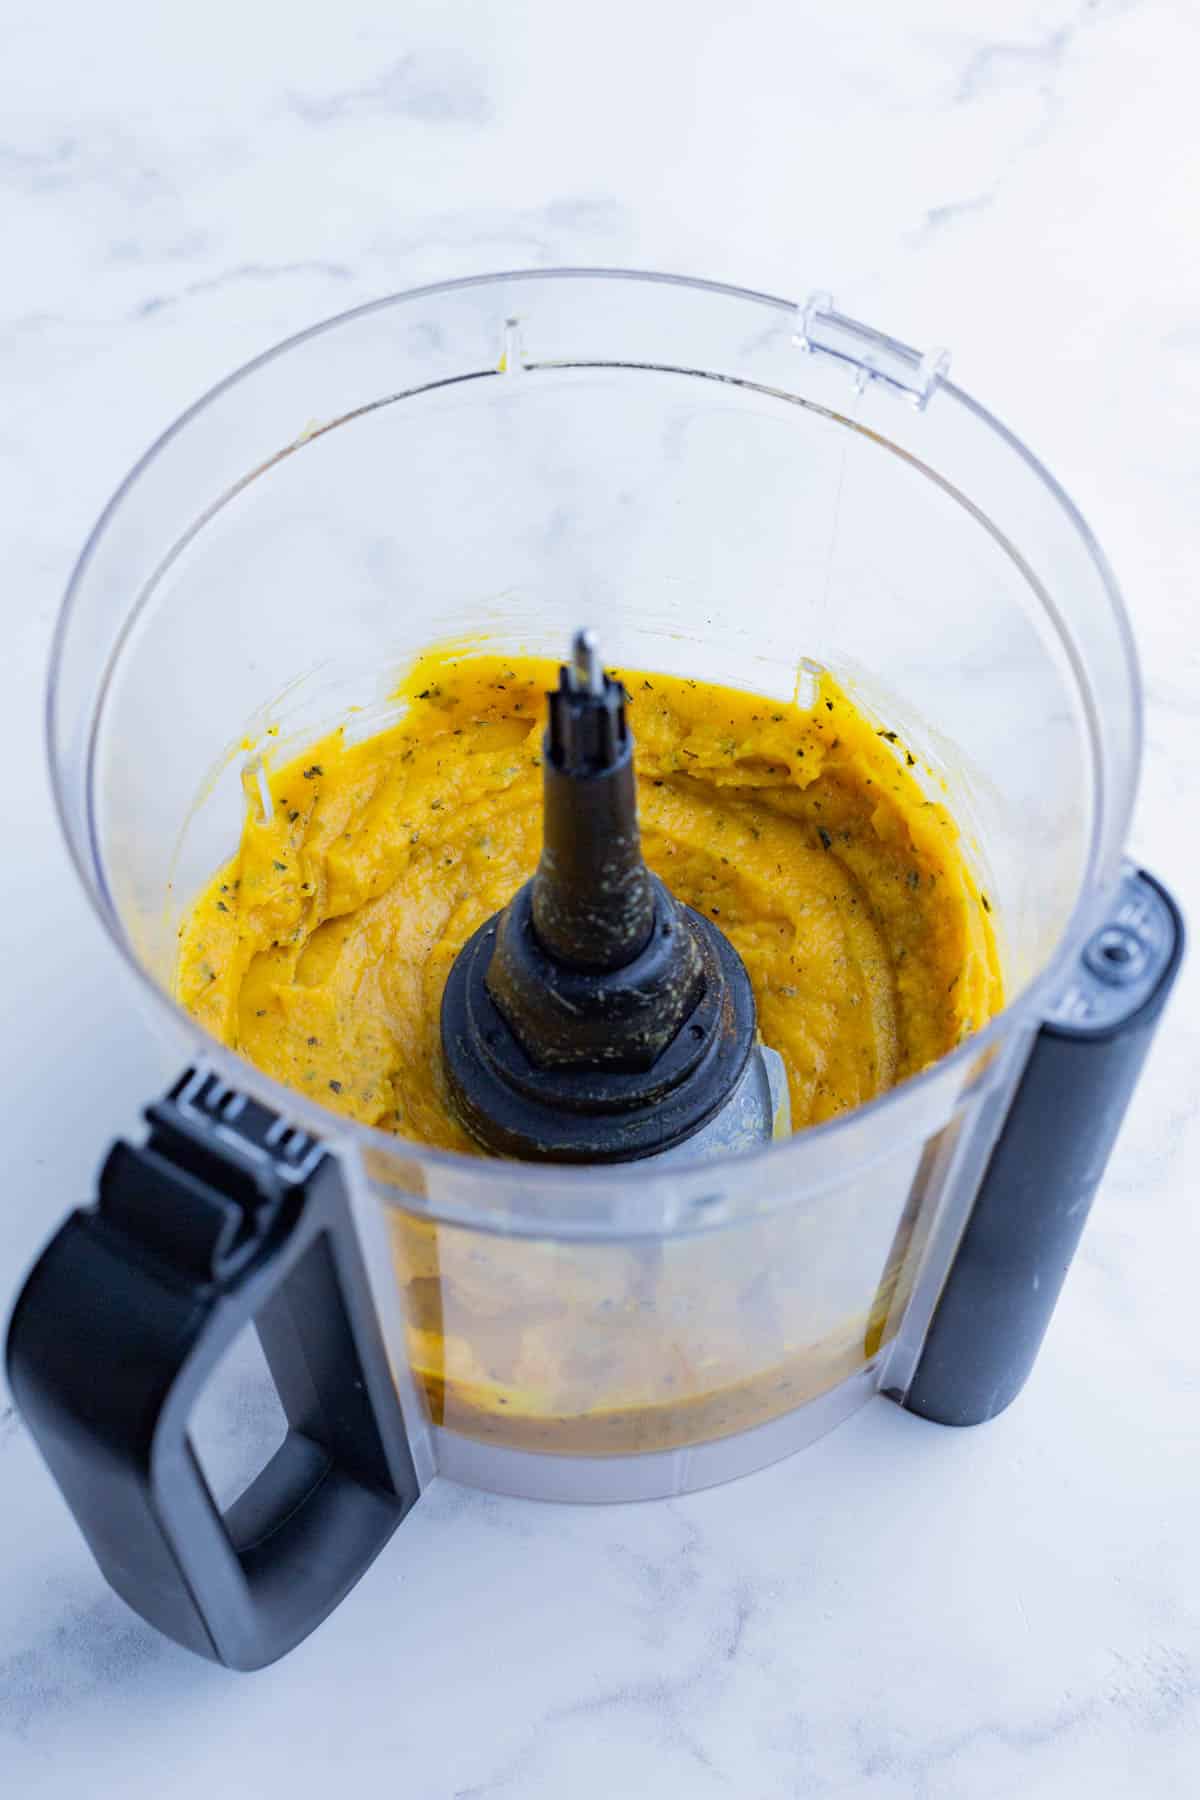 Butternut squash and seasonings are blended in a food processor.